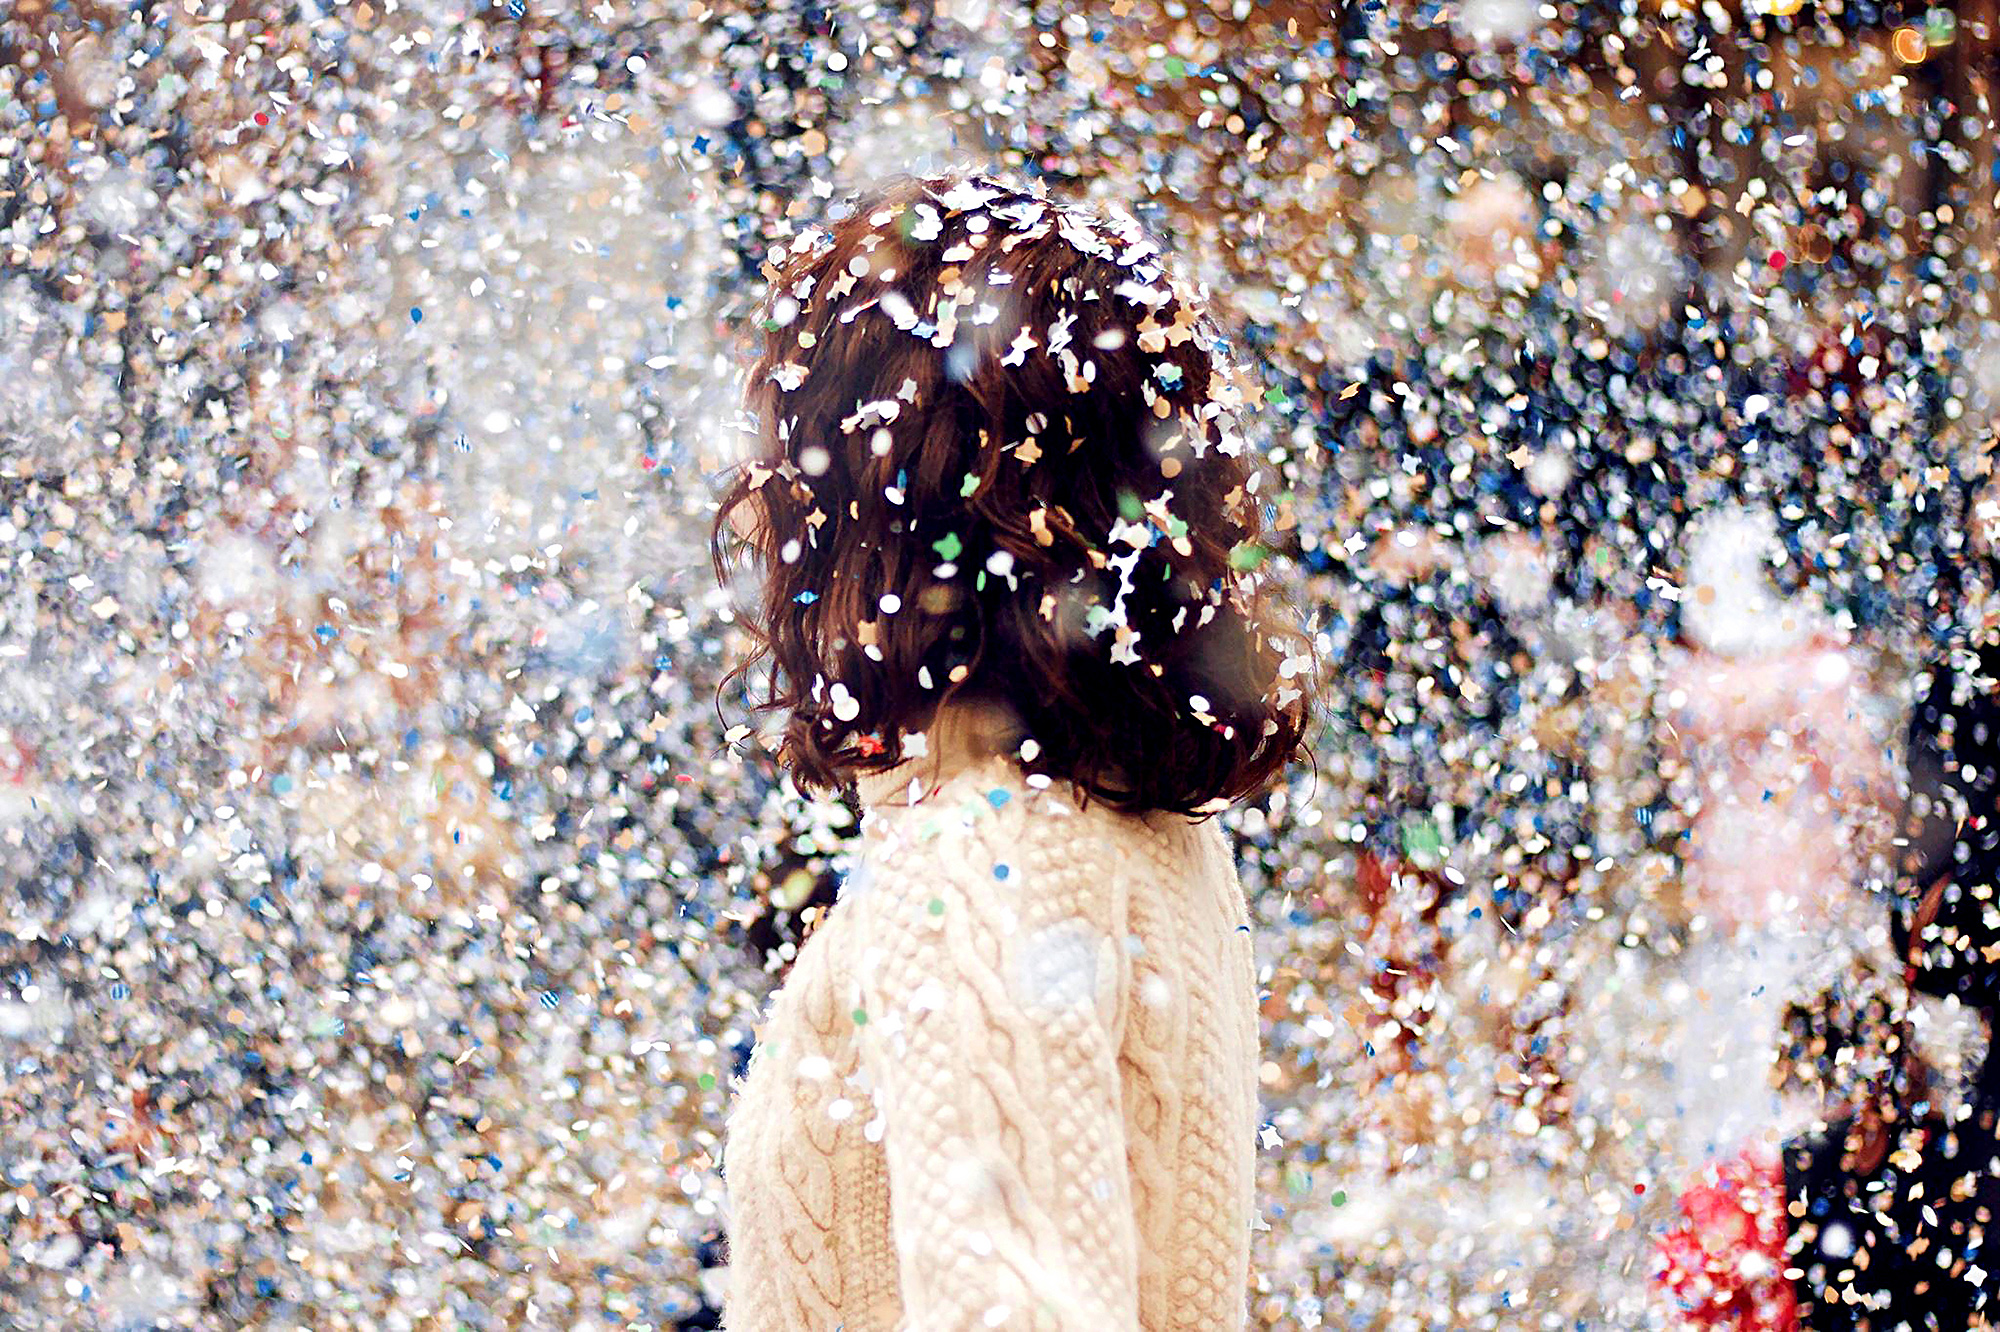 a woman with long brown hair stands amidst a flurry of multi-colored confetti